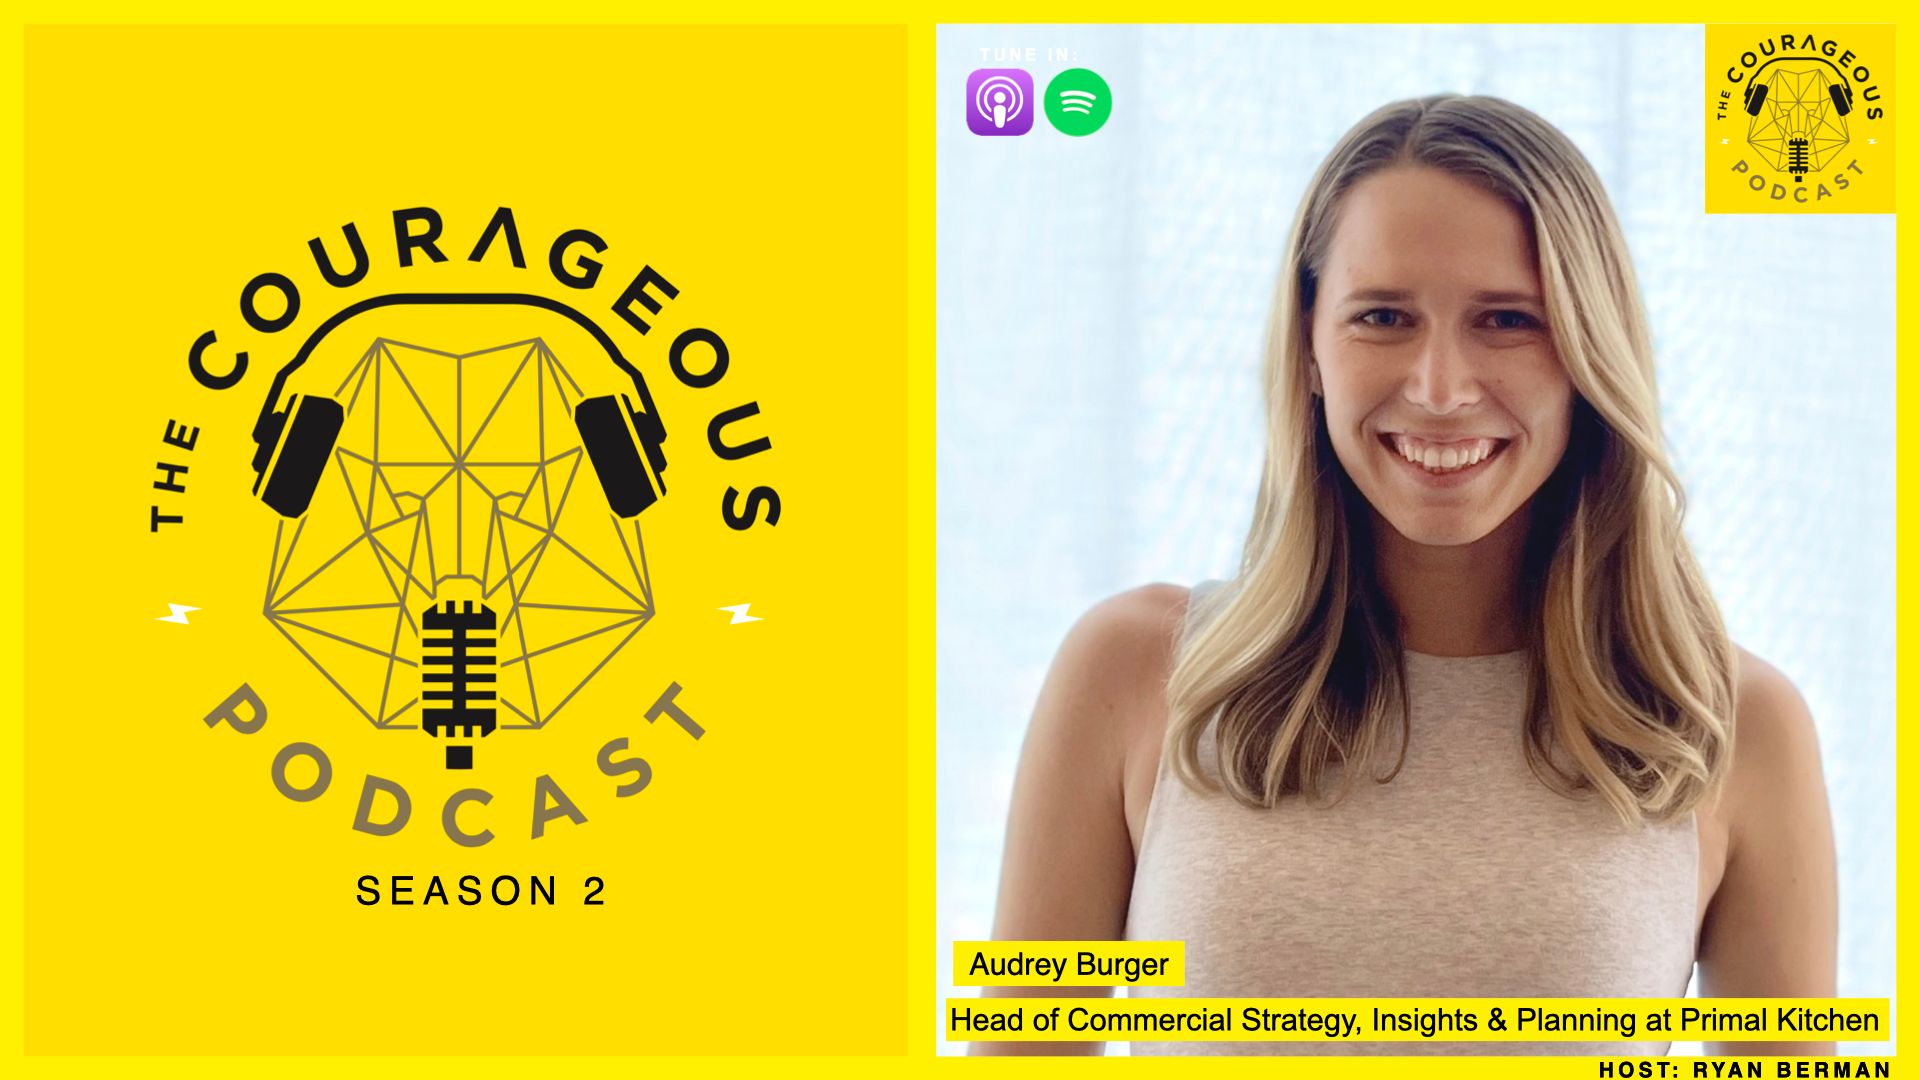 EP101 Audrey Burger - Head of Commercial Strategy, Insights, & Planning - Primal Kitchen